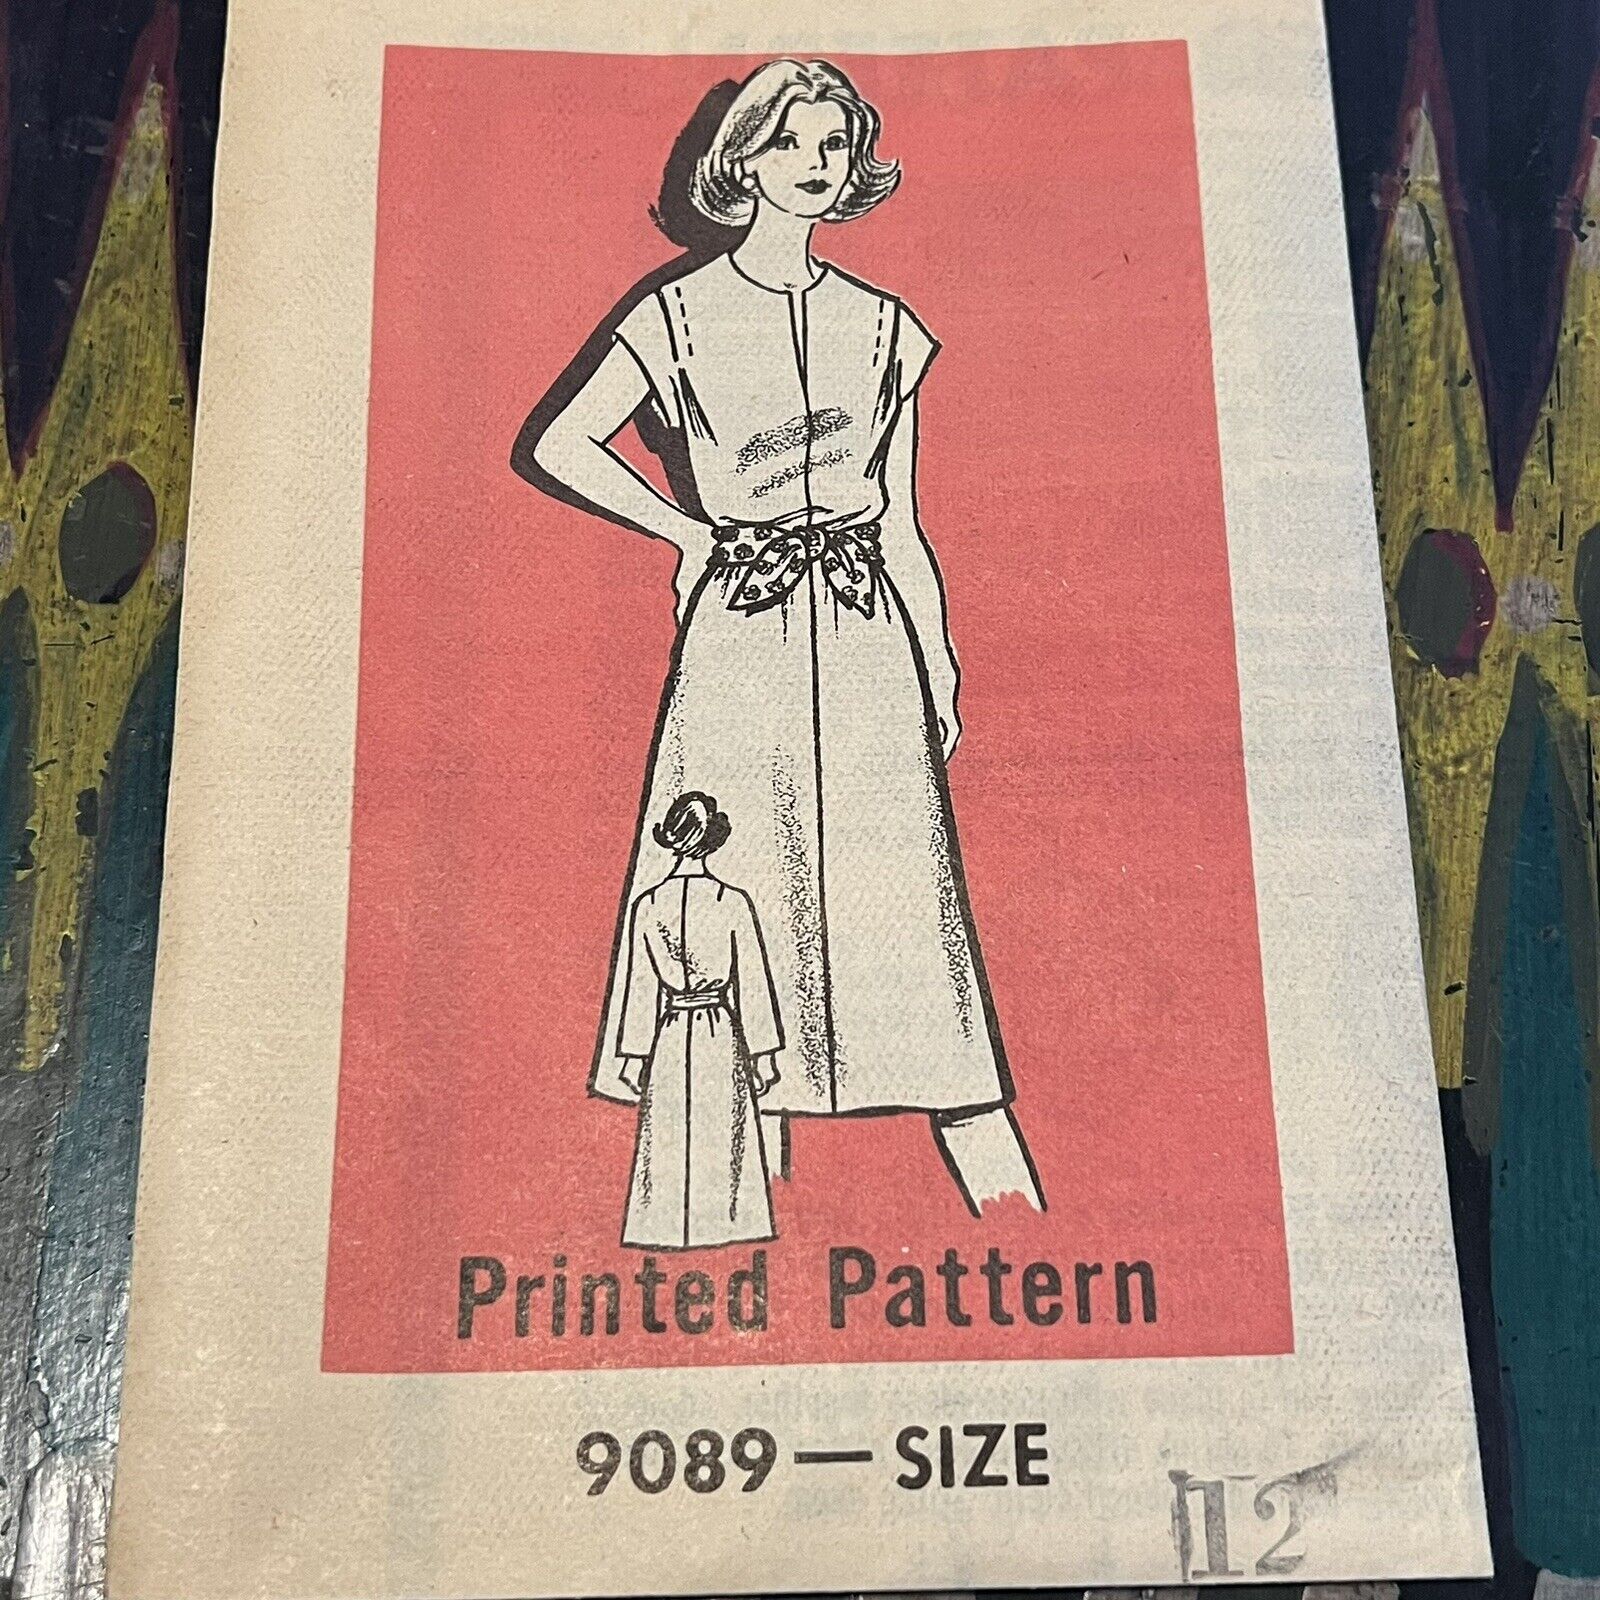 Vintage 1980s Marian Martin 9089 Mail Order Belted Dress Sewing Pattern 12 UNCUT